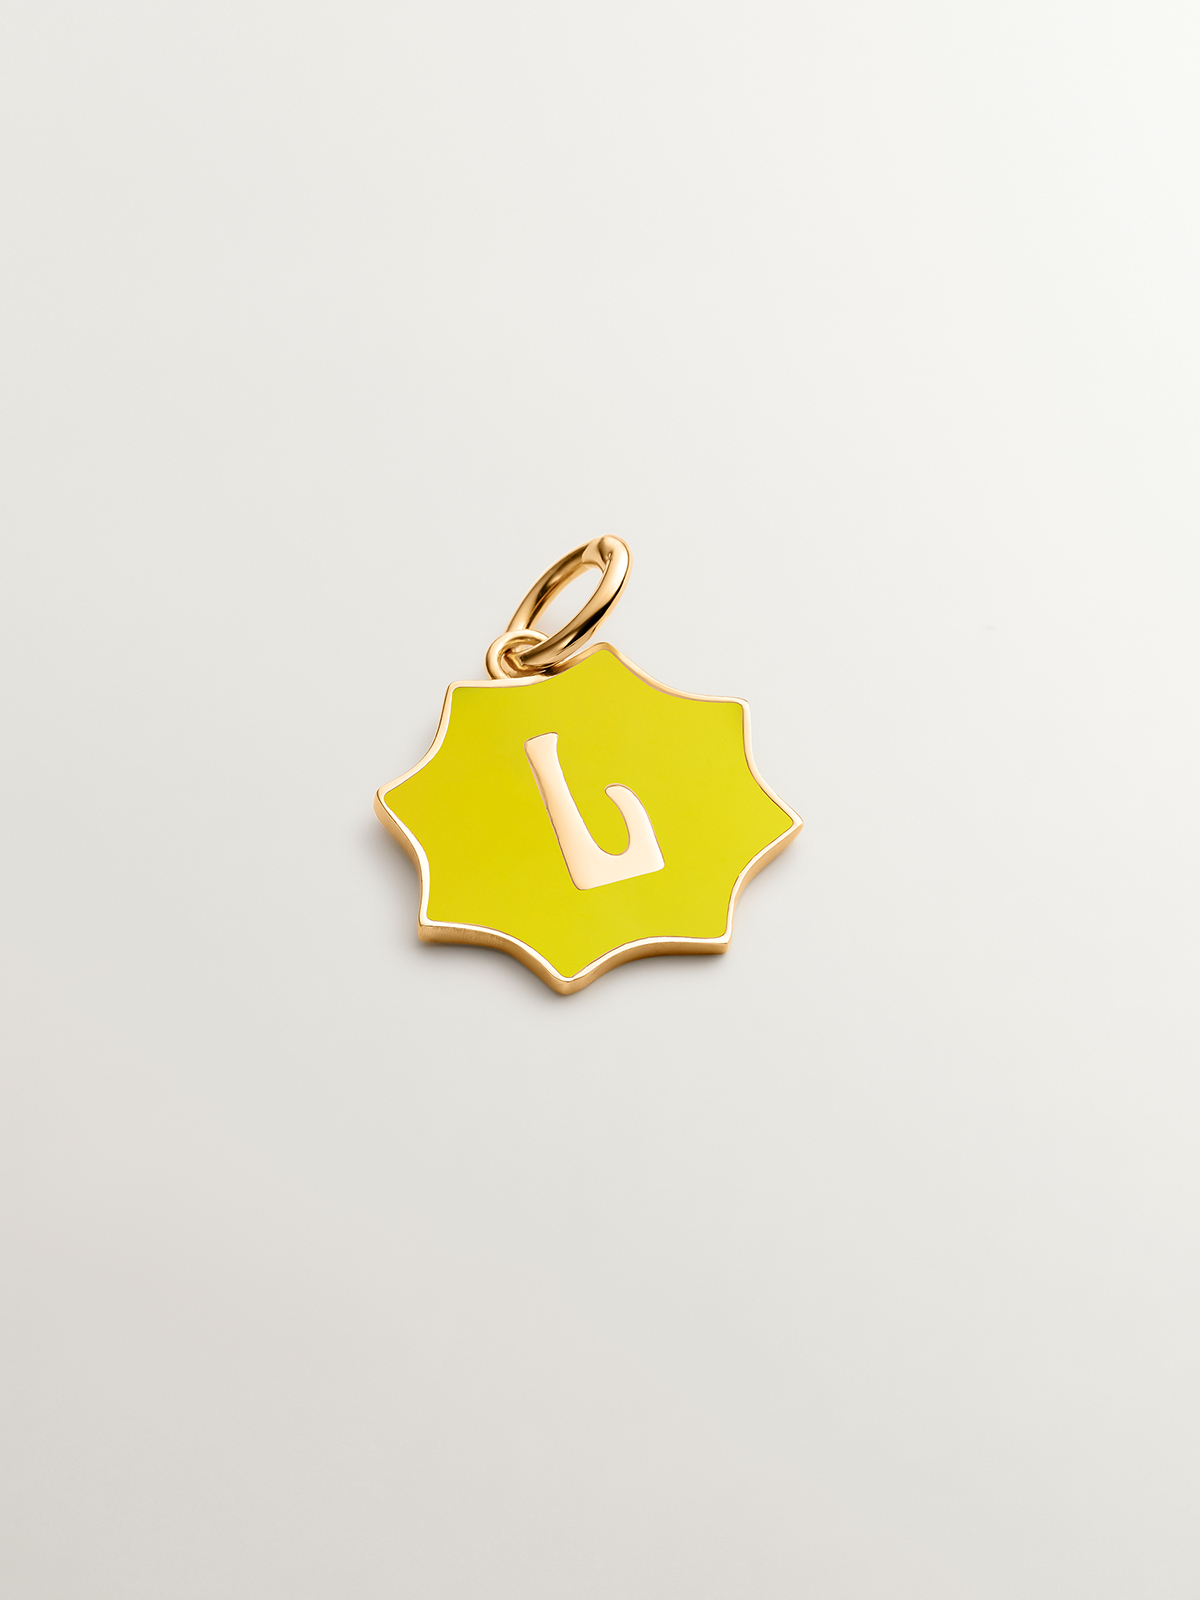 18K yellow gold plated 925 sterling silver charm with star-shaped yellow enamel initial L